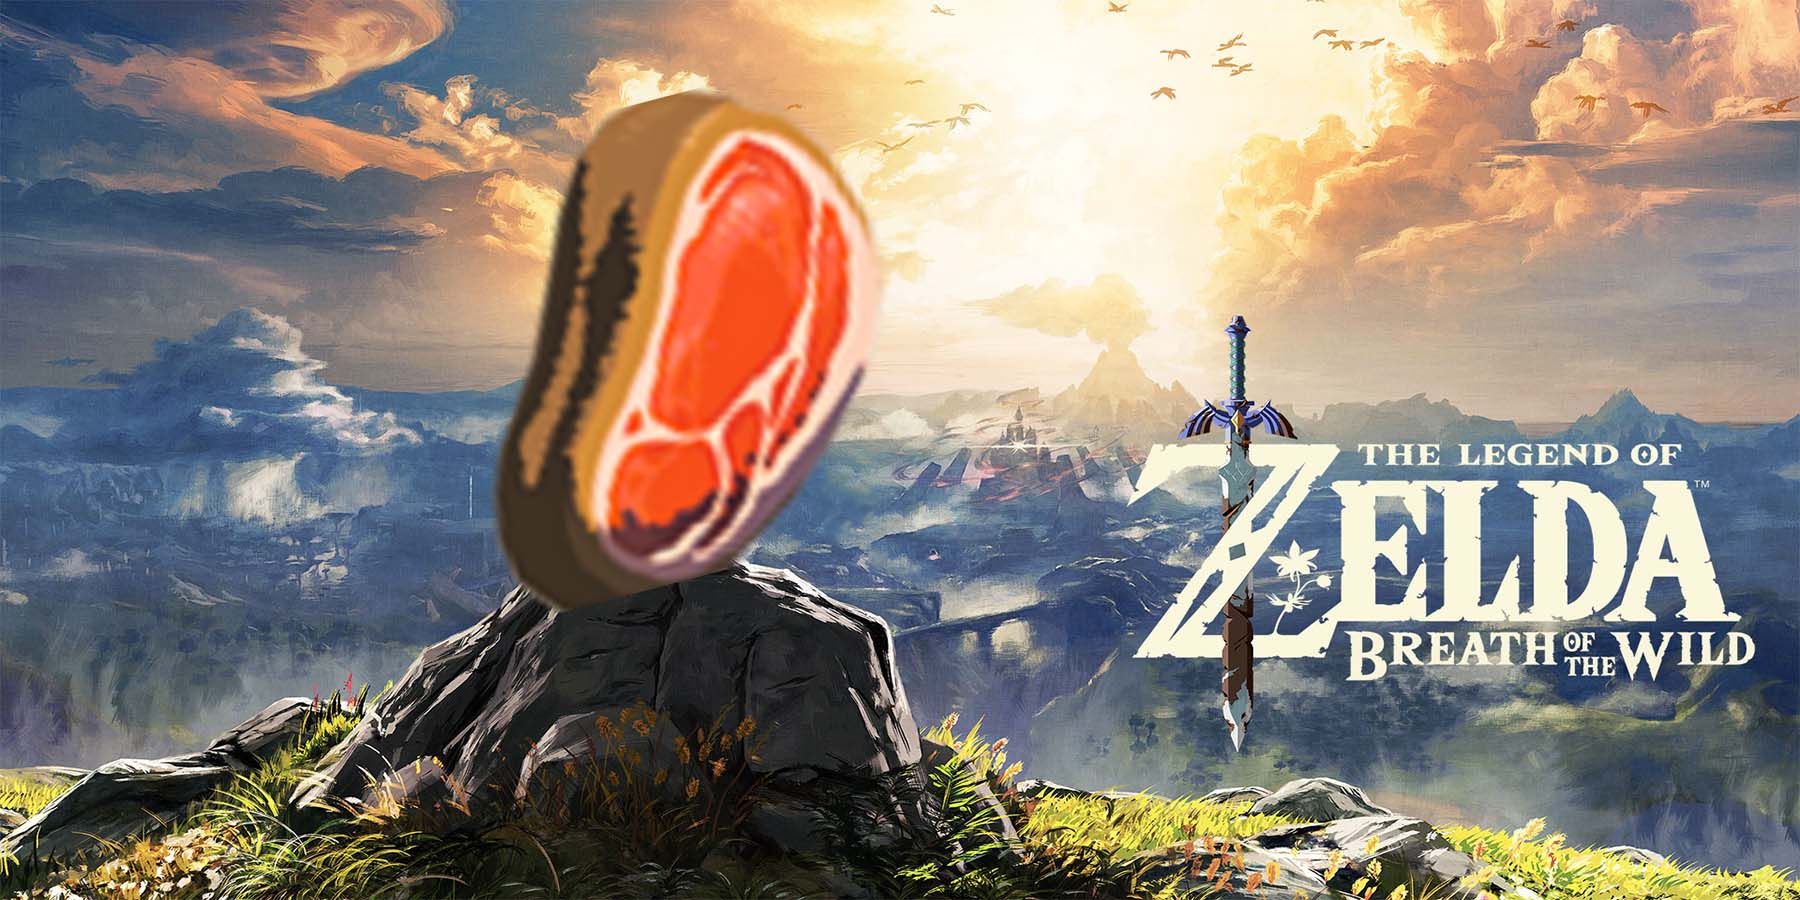 breath of the wild raw meat locations